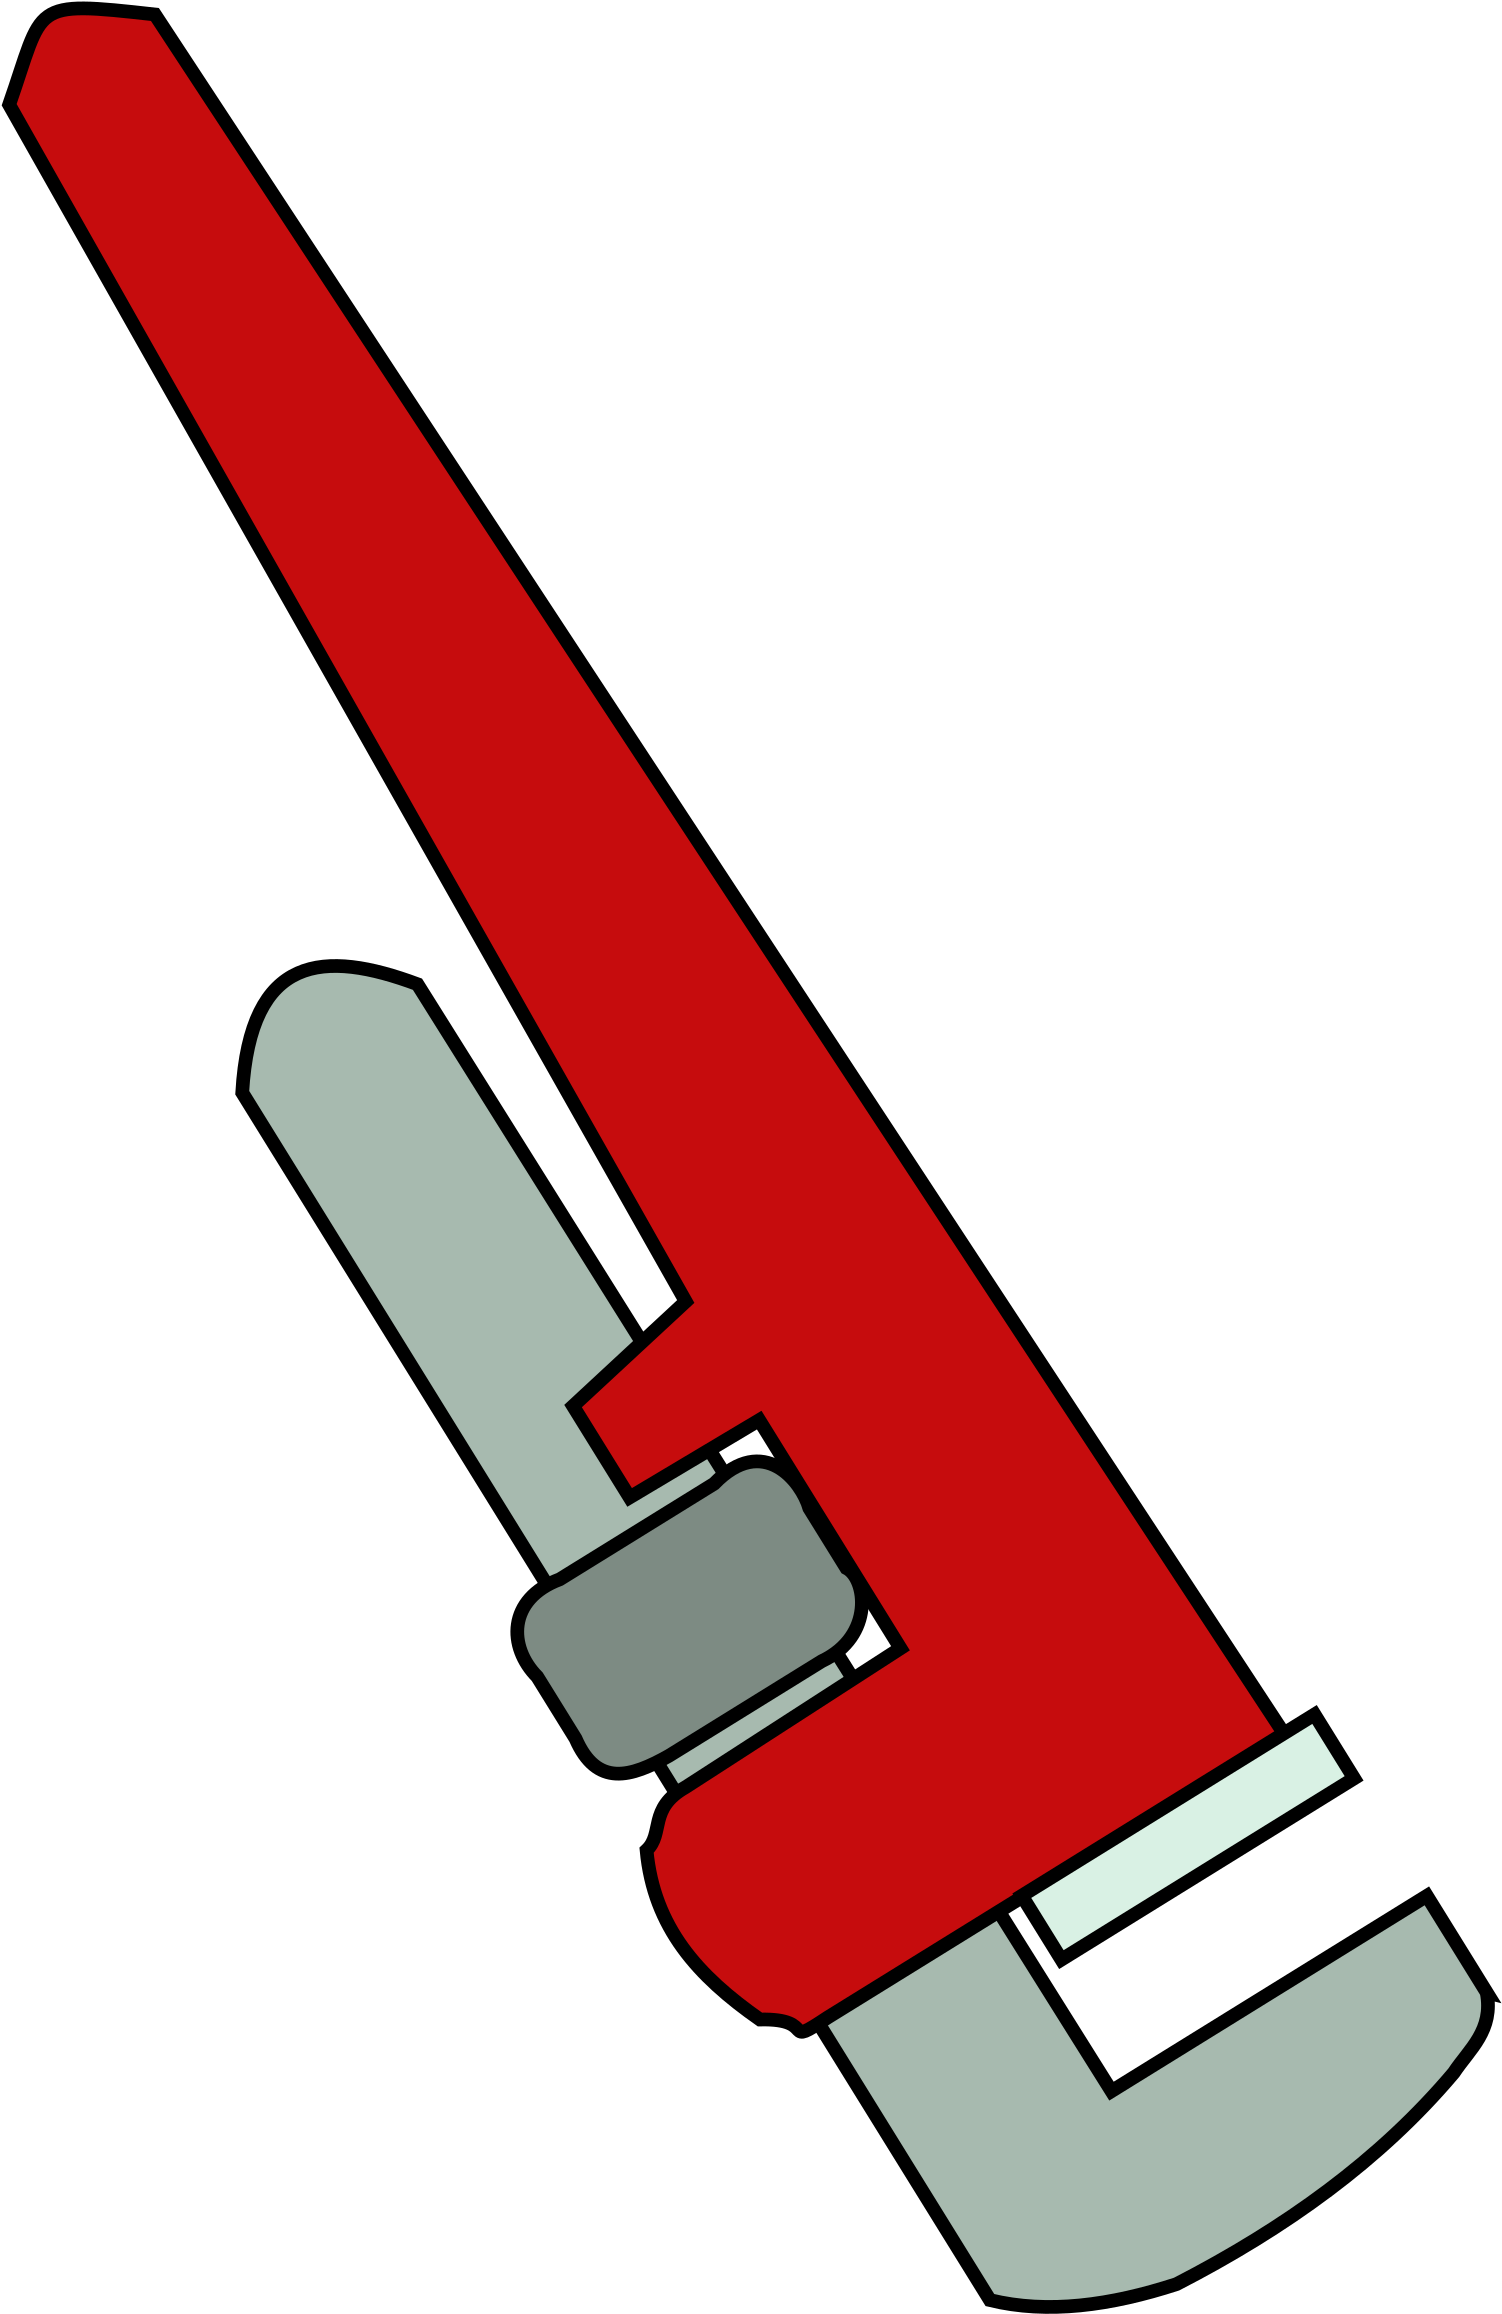 Pipe Wrench By @bnielsen, A Pipe Wrench - Pipe Wrench Clipart (1543x2400)